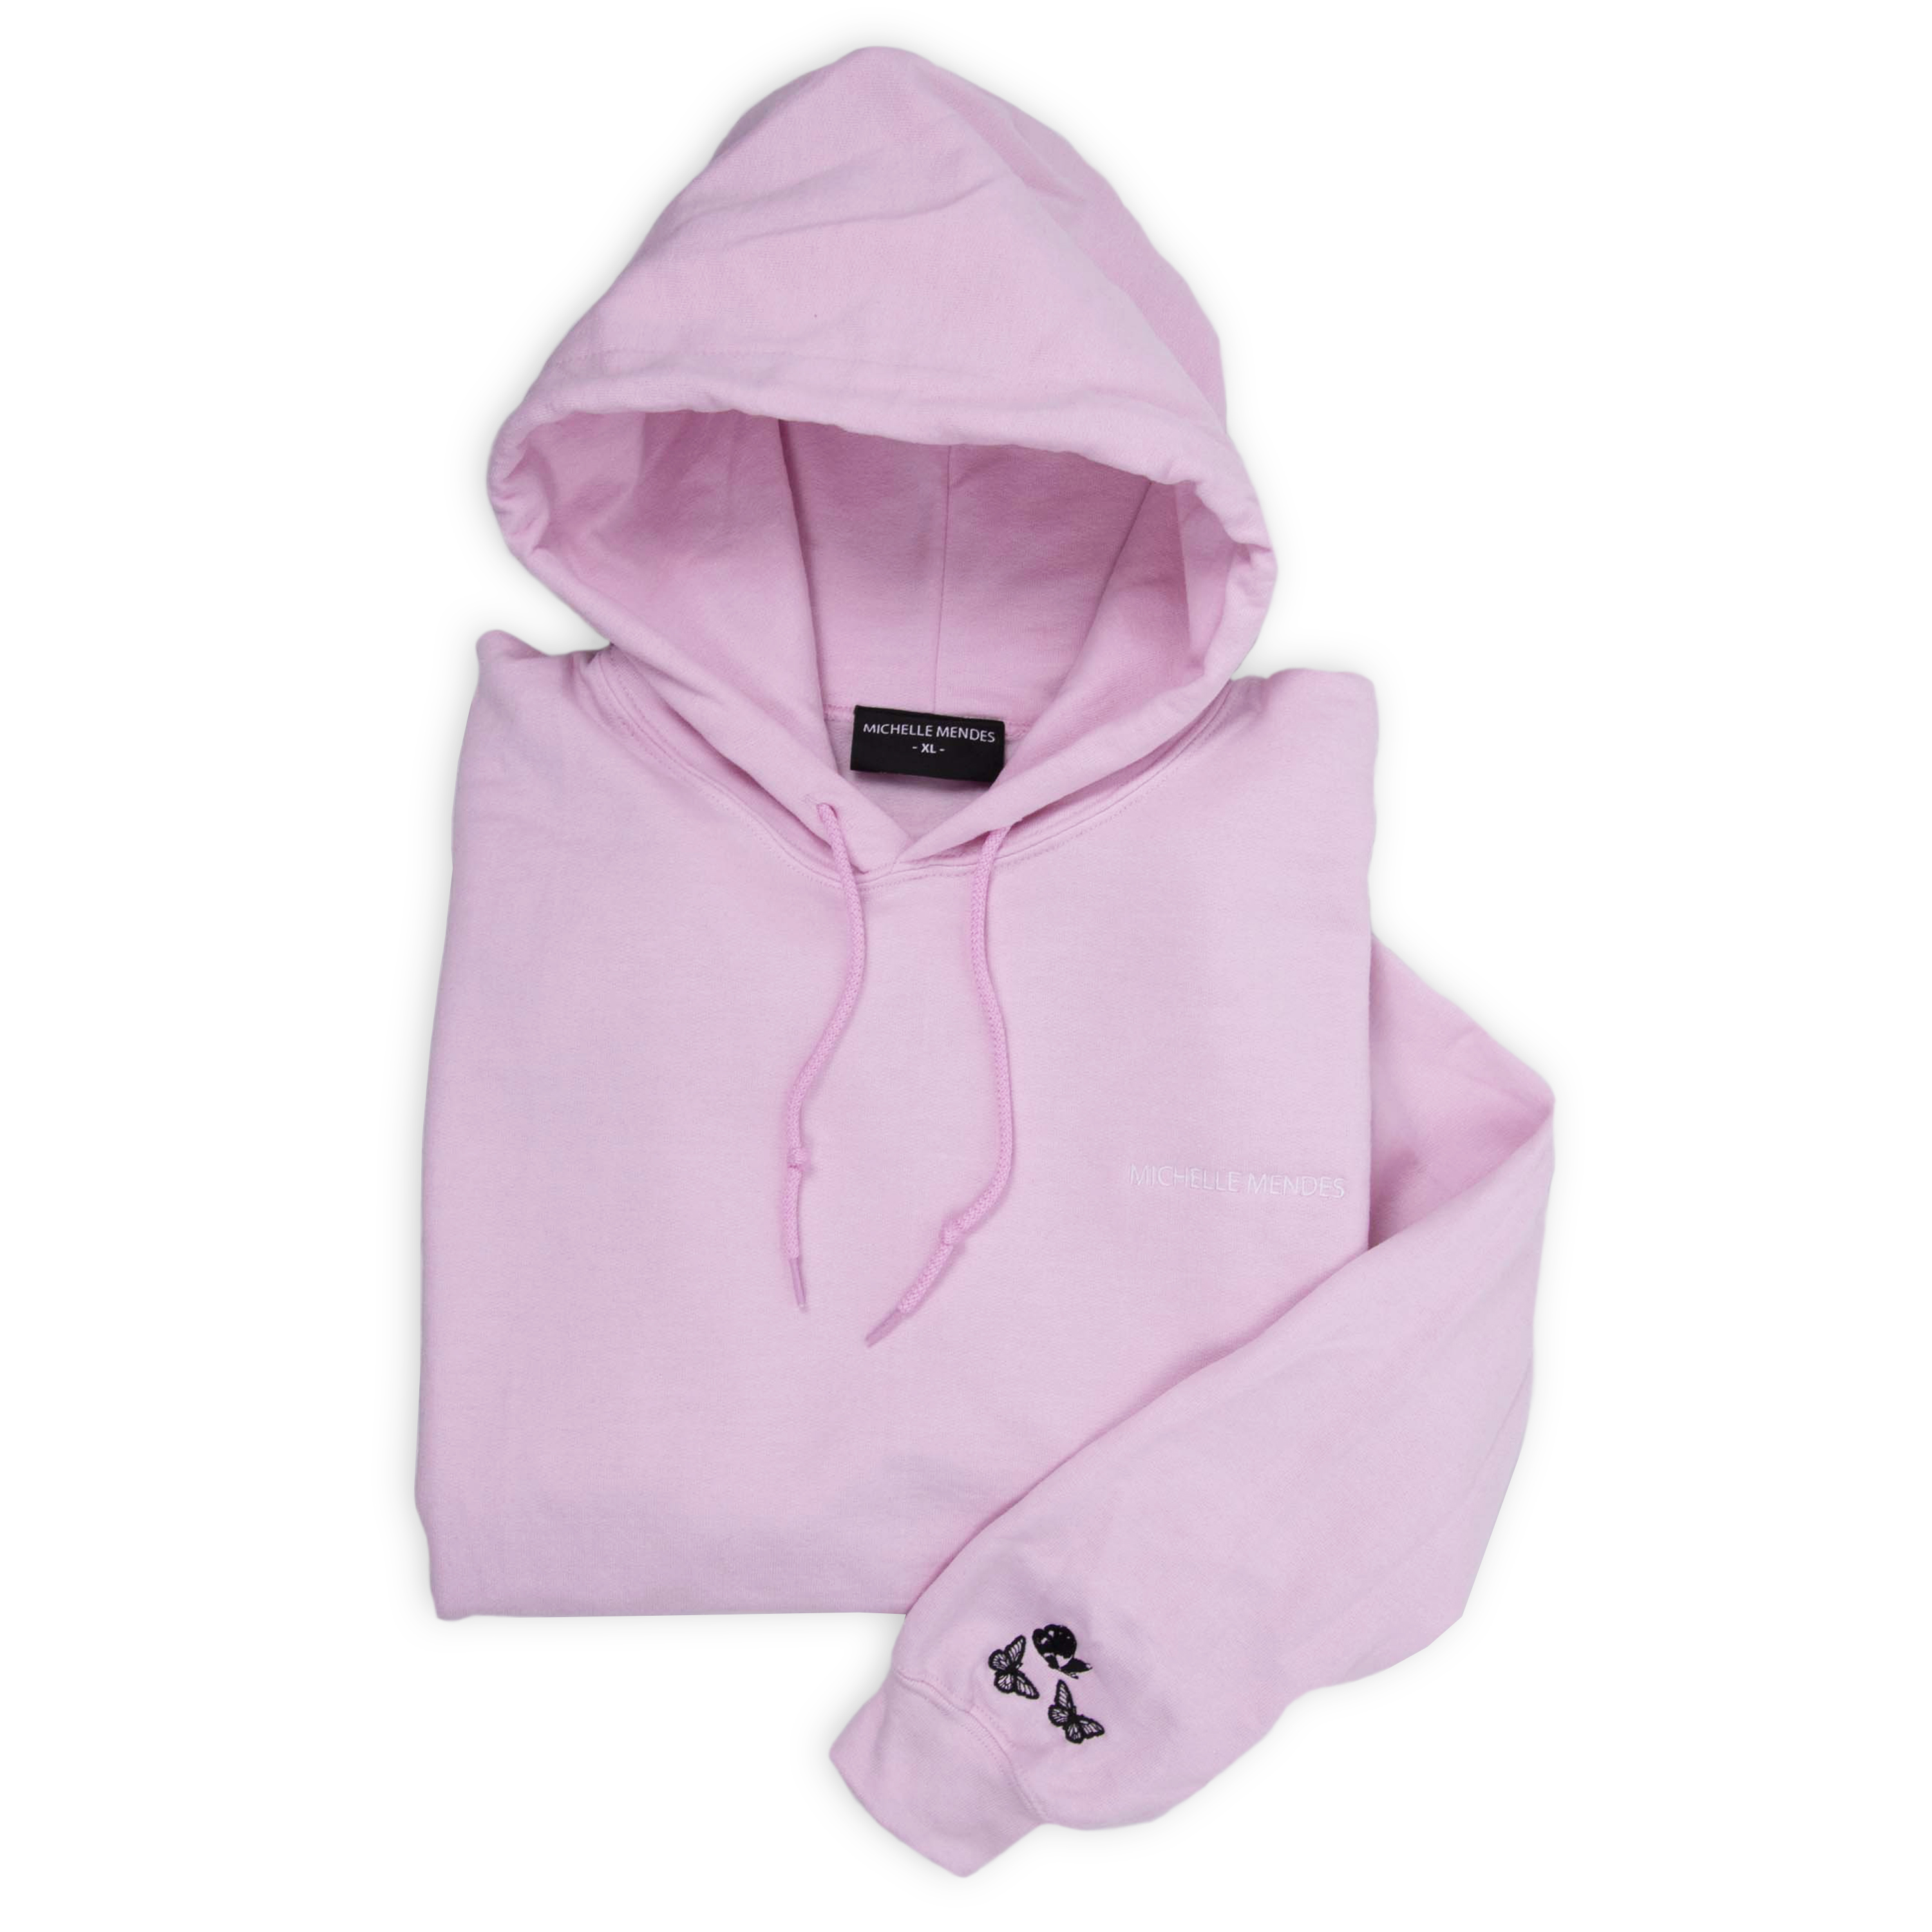 Fashion Hoodies and Rosa Textiles Schmetterling Hoodie | | Merch |